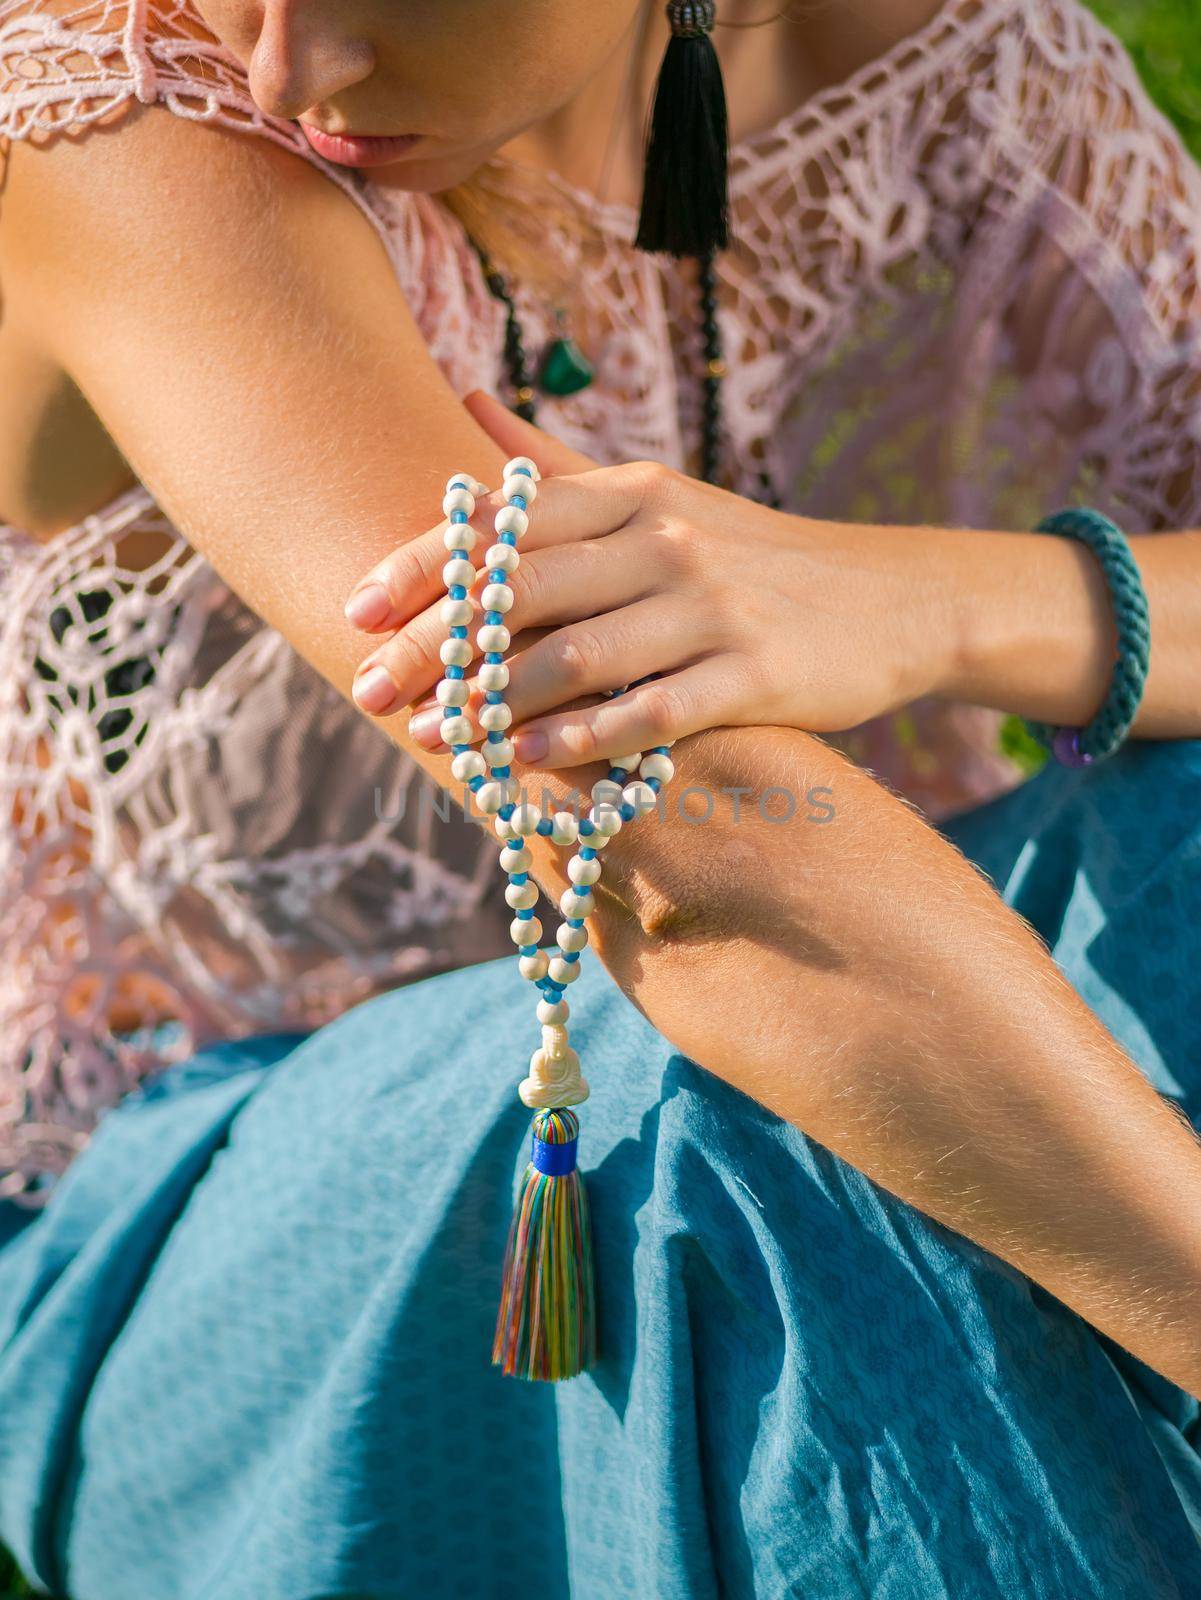 Woman, lit hand close up, counts Malas, strands of wooden beads used for keeping count during mantra meditations. Buddhism. Girl sitting in the park at summer. by kristina_kokhanova